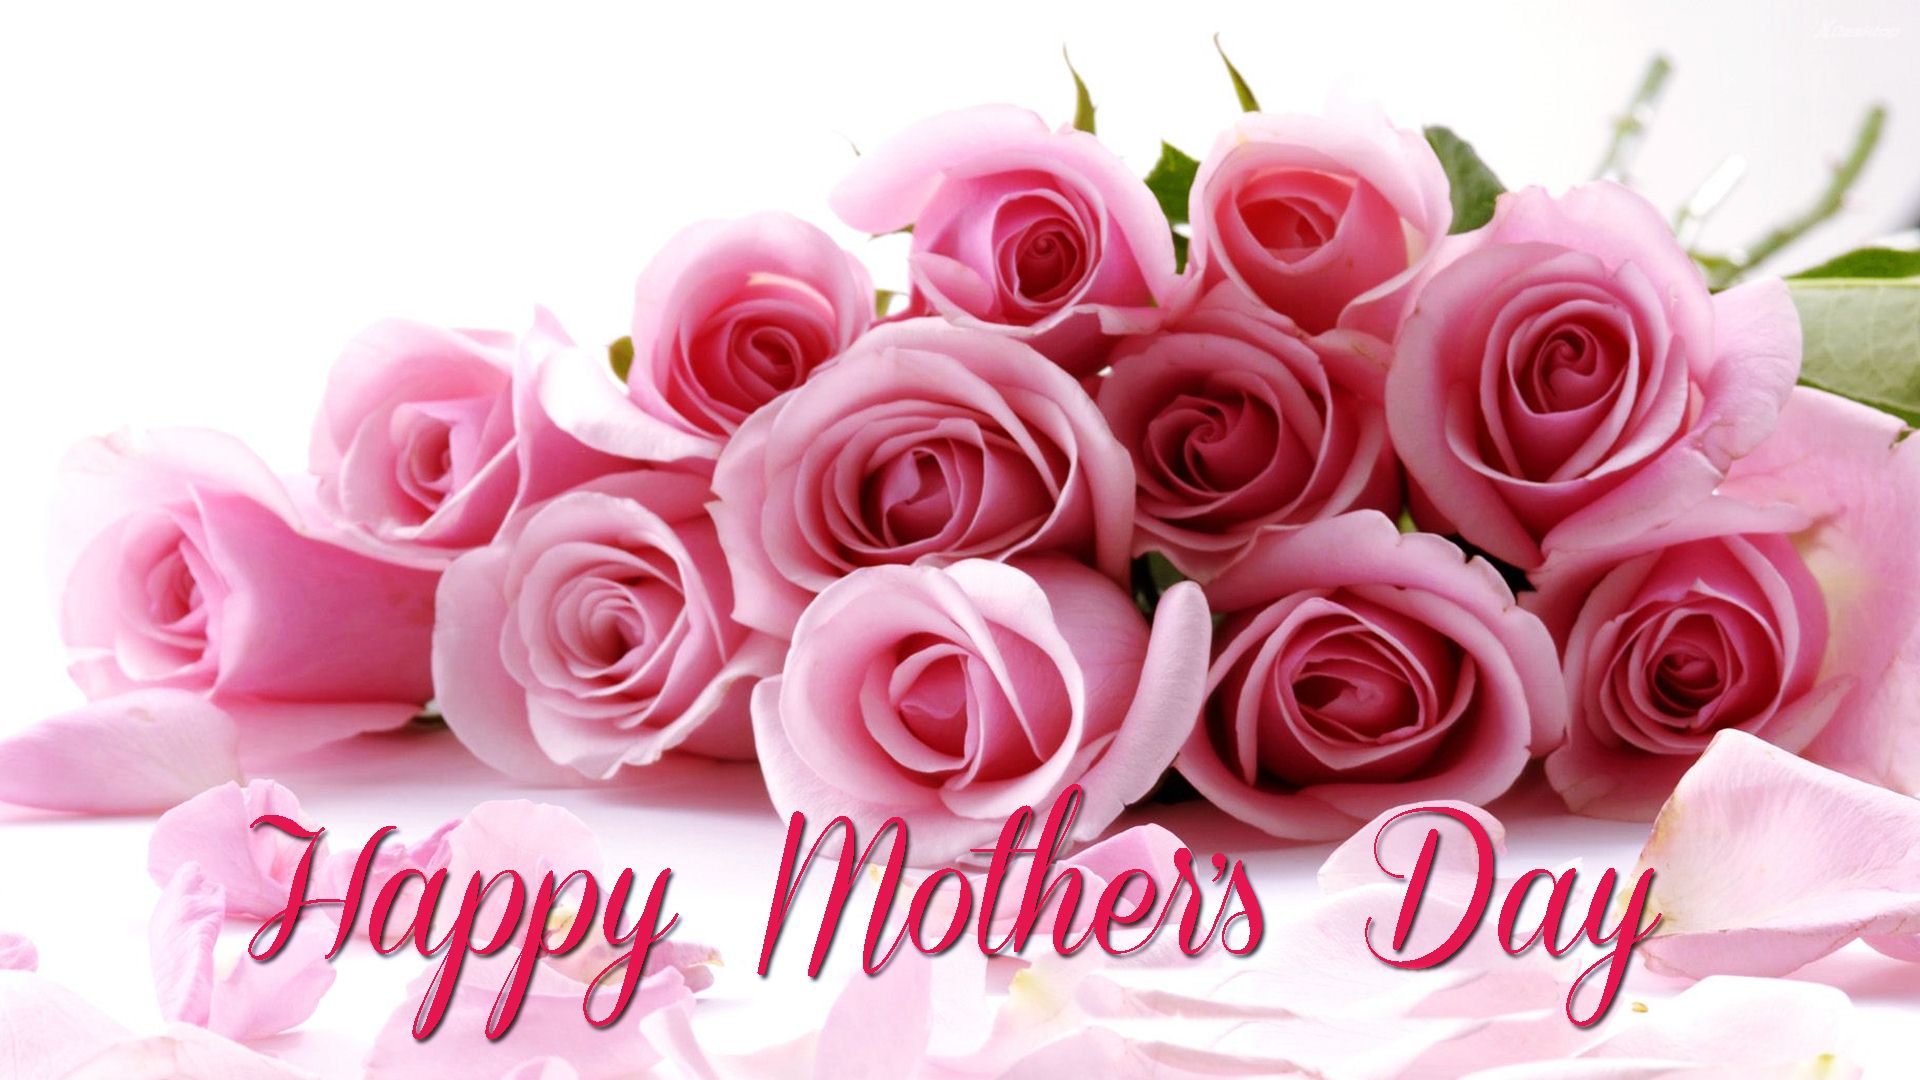 Mothers Day Wallpaper Image